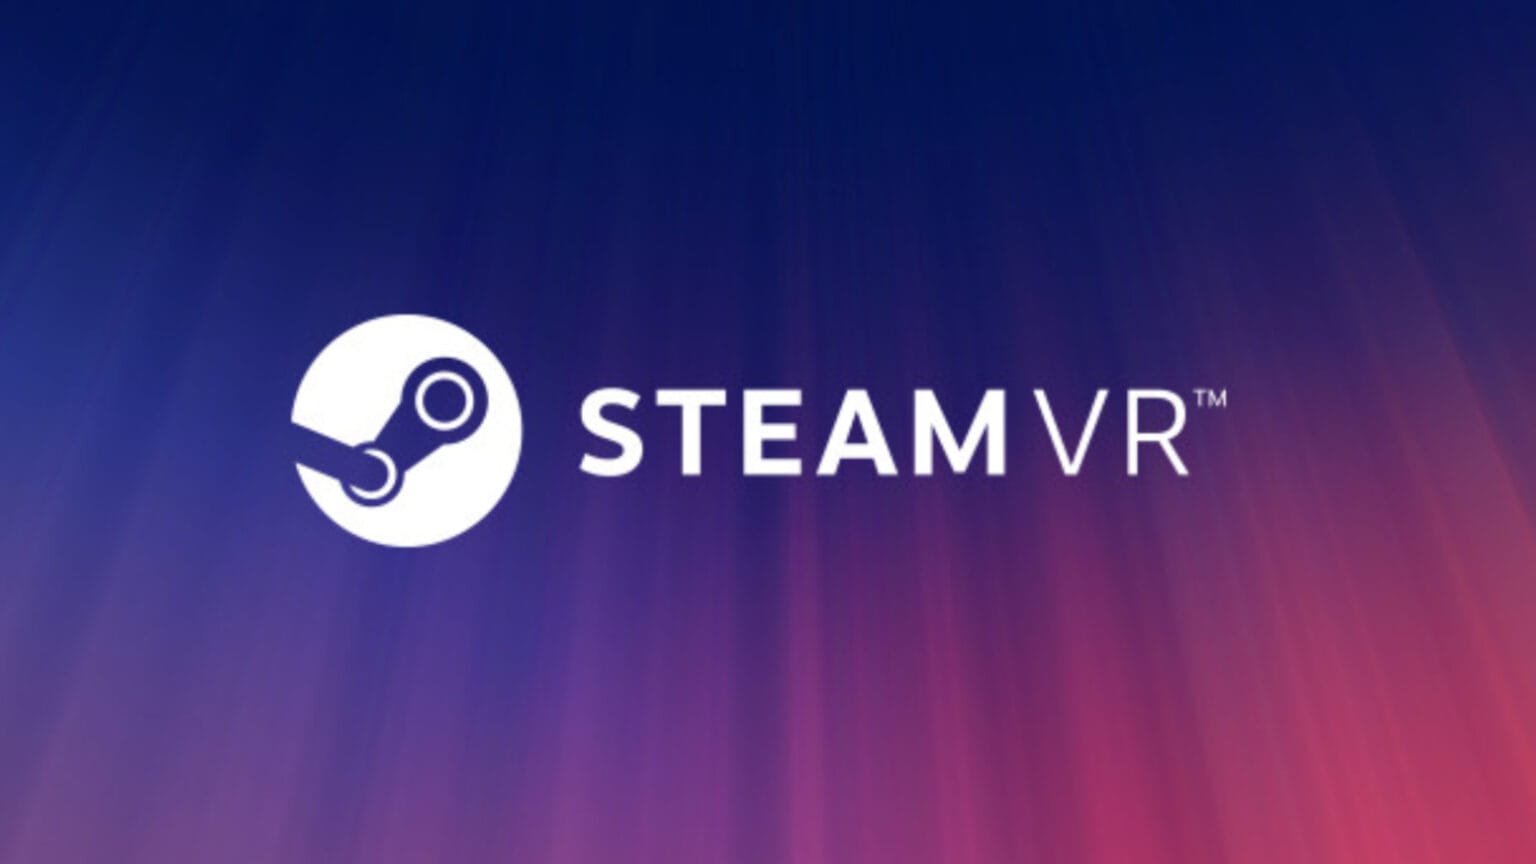 How To Use Steam VR With Meta (Oculus) Quest 2 or 3